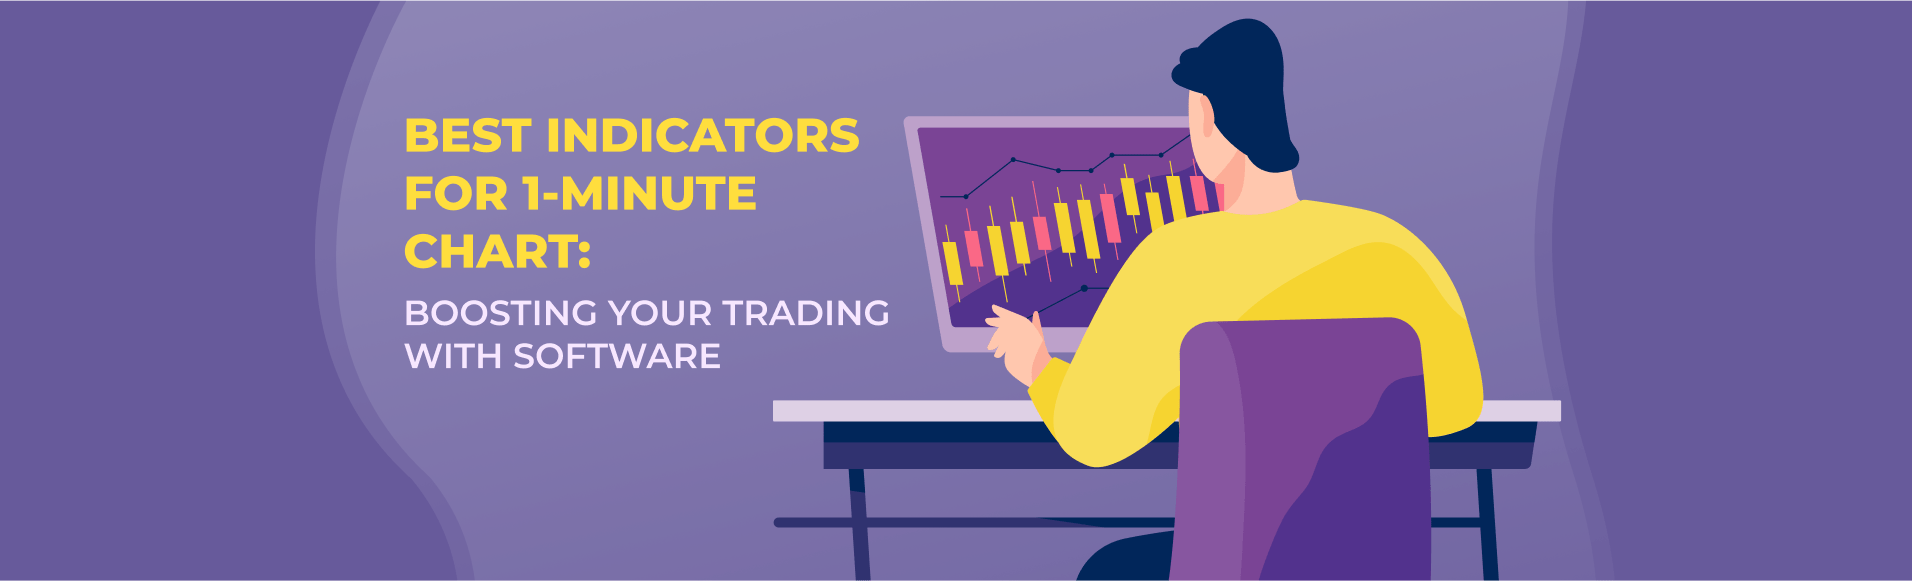 Best Indicators for 1-Minute Chart: Boosting Your Trading with Software